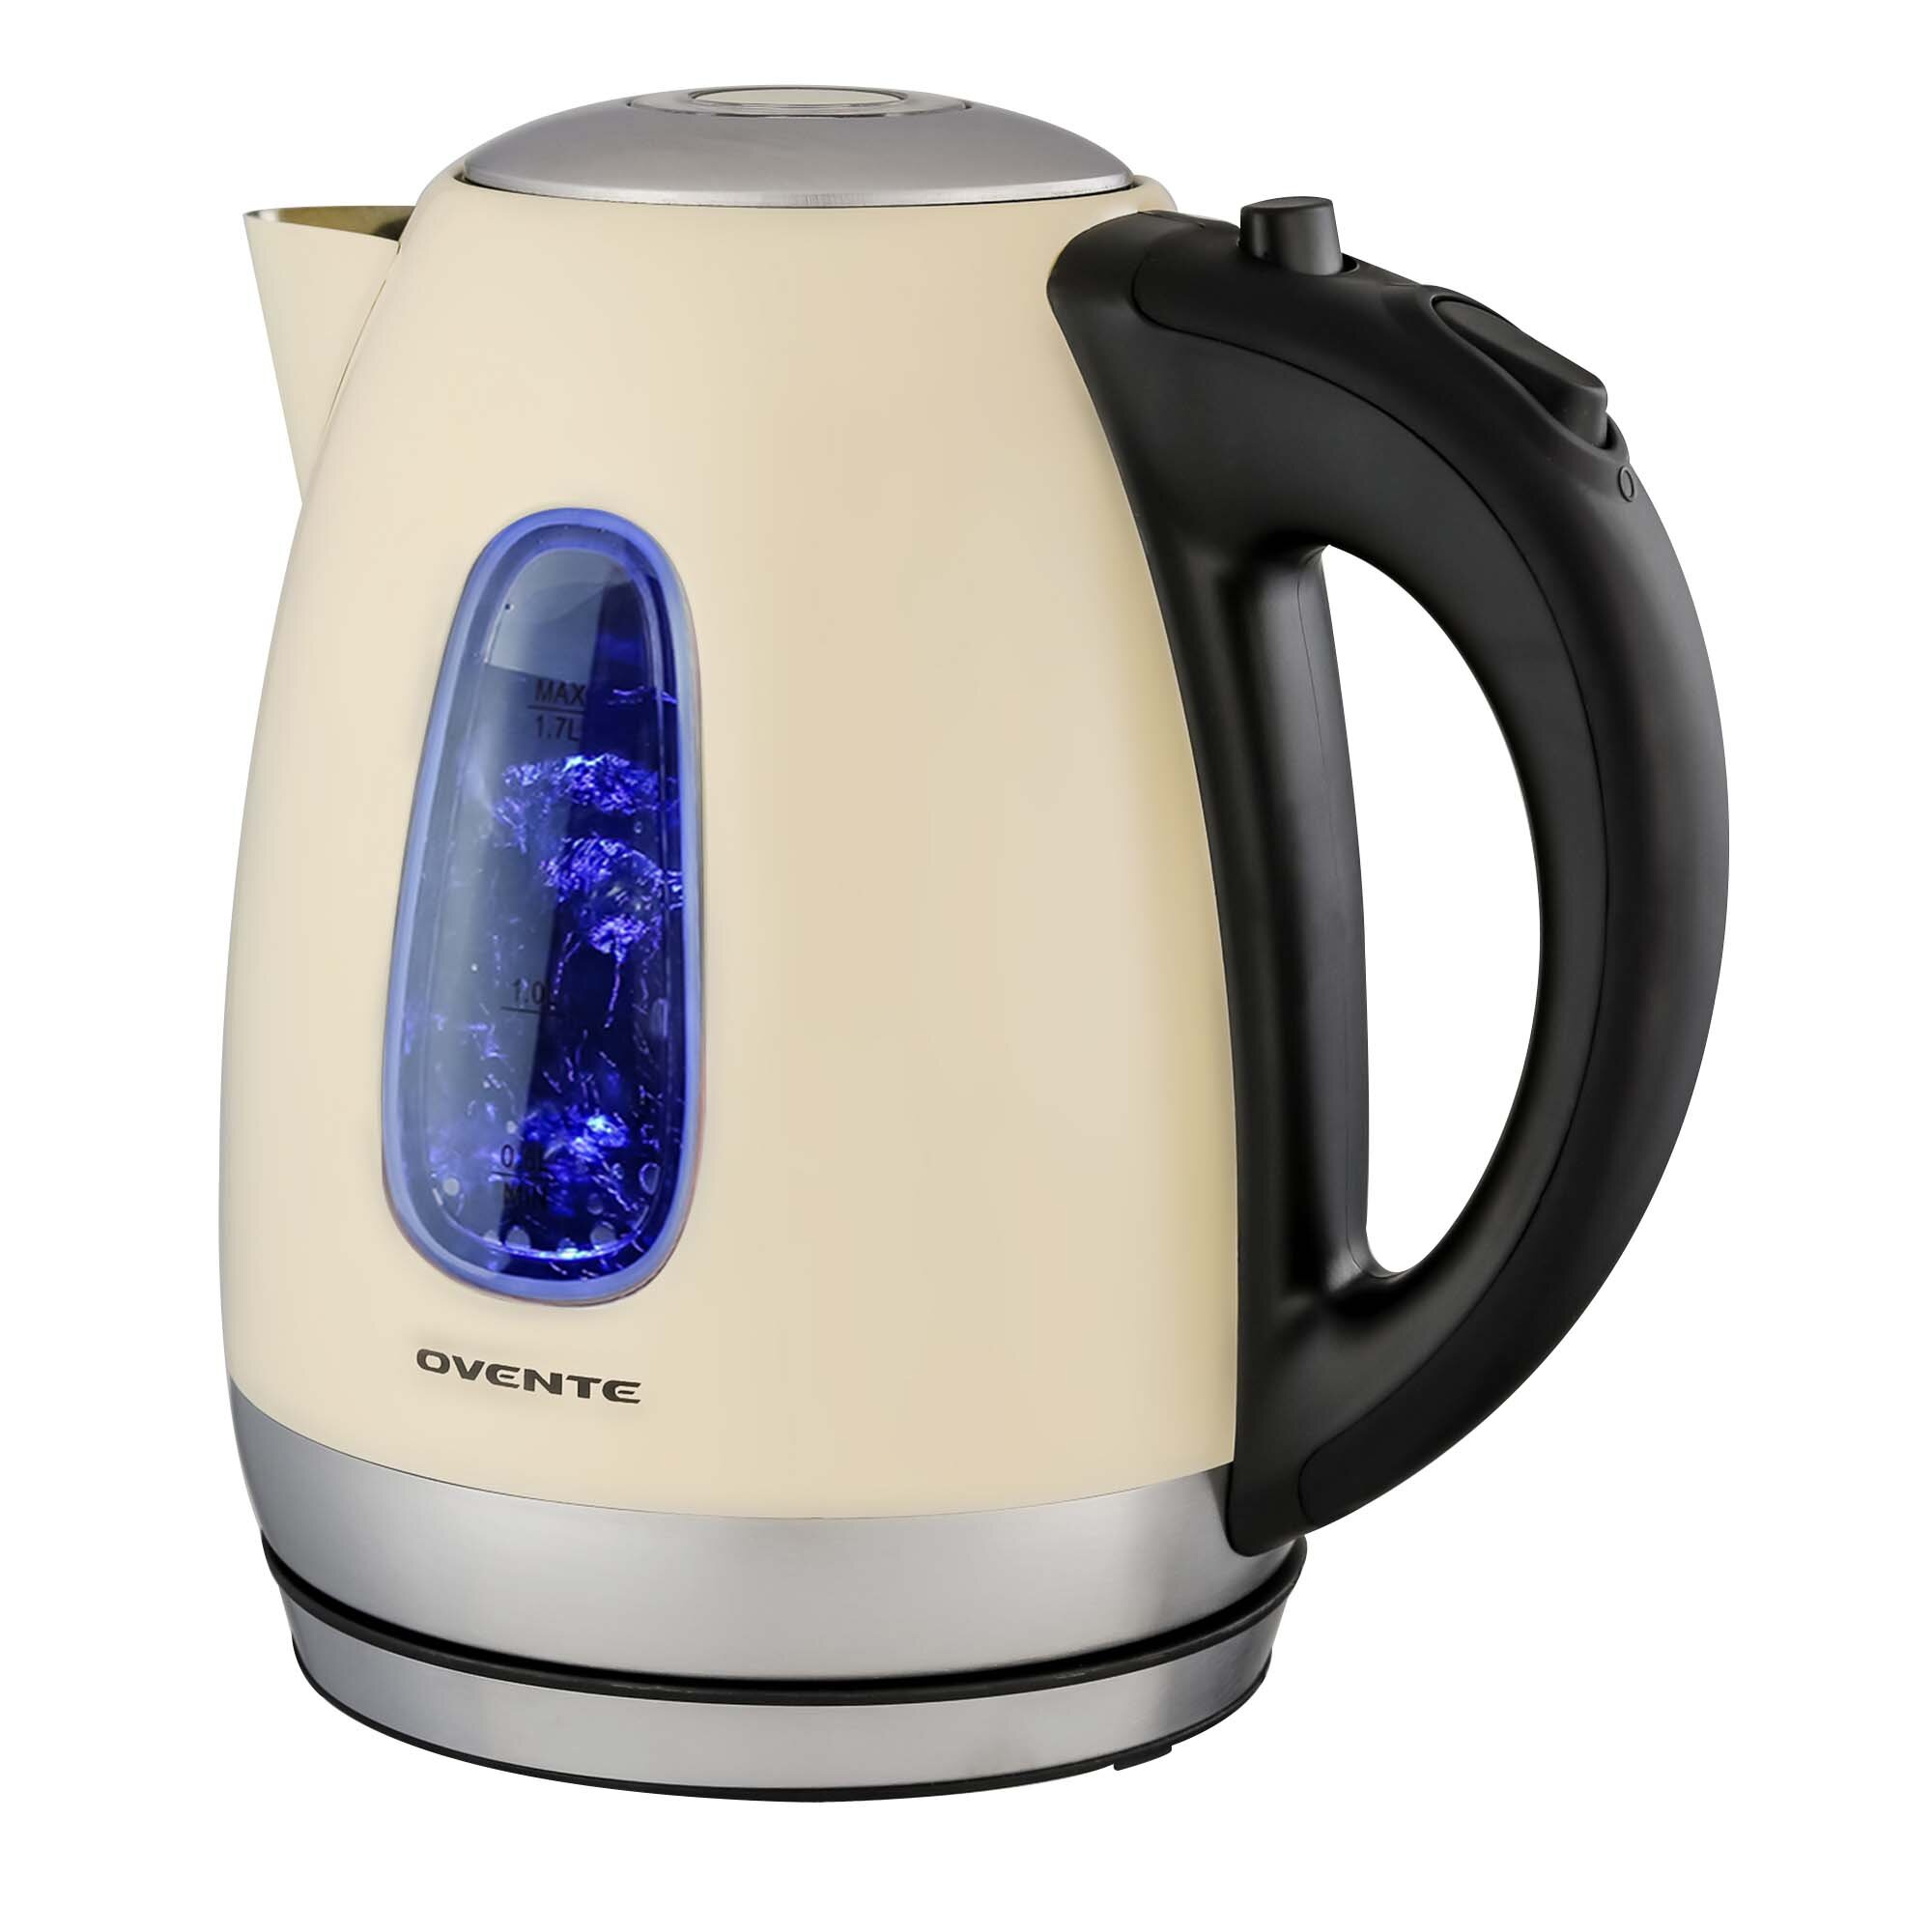 Nostalgia Retro 1.7-Liter Stainless Steel Electric Water Kettle